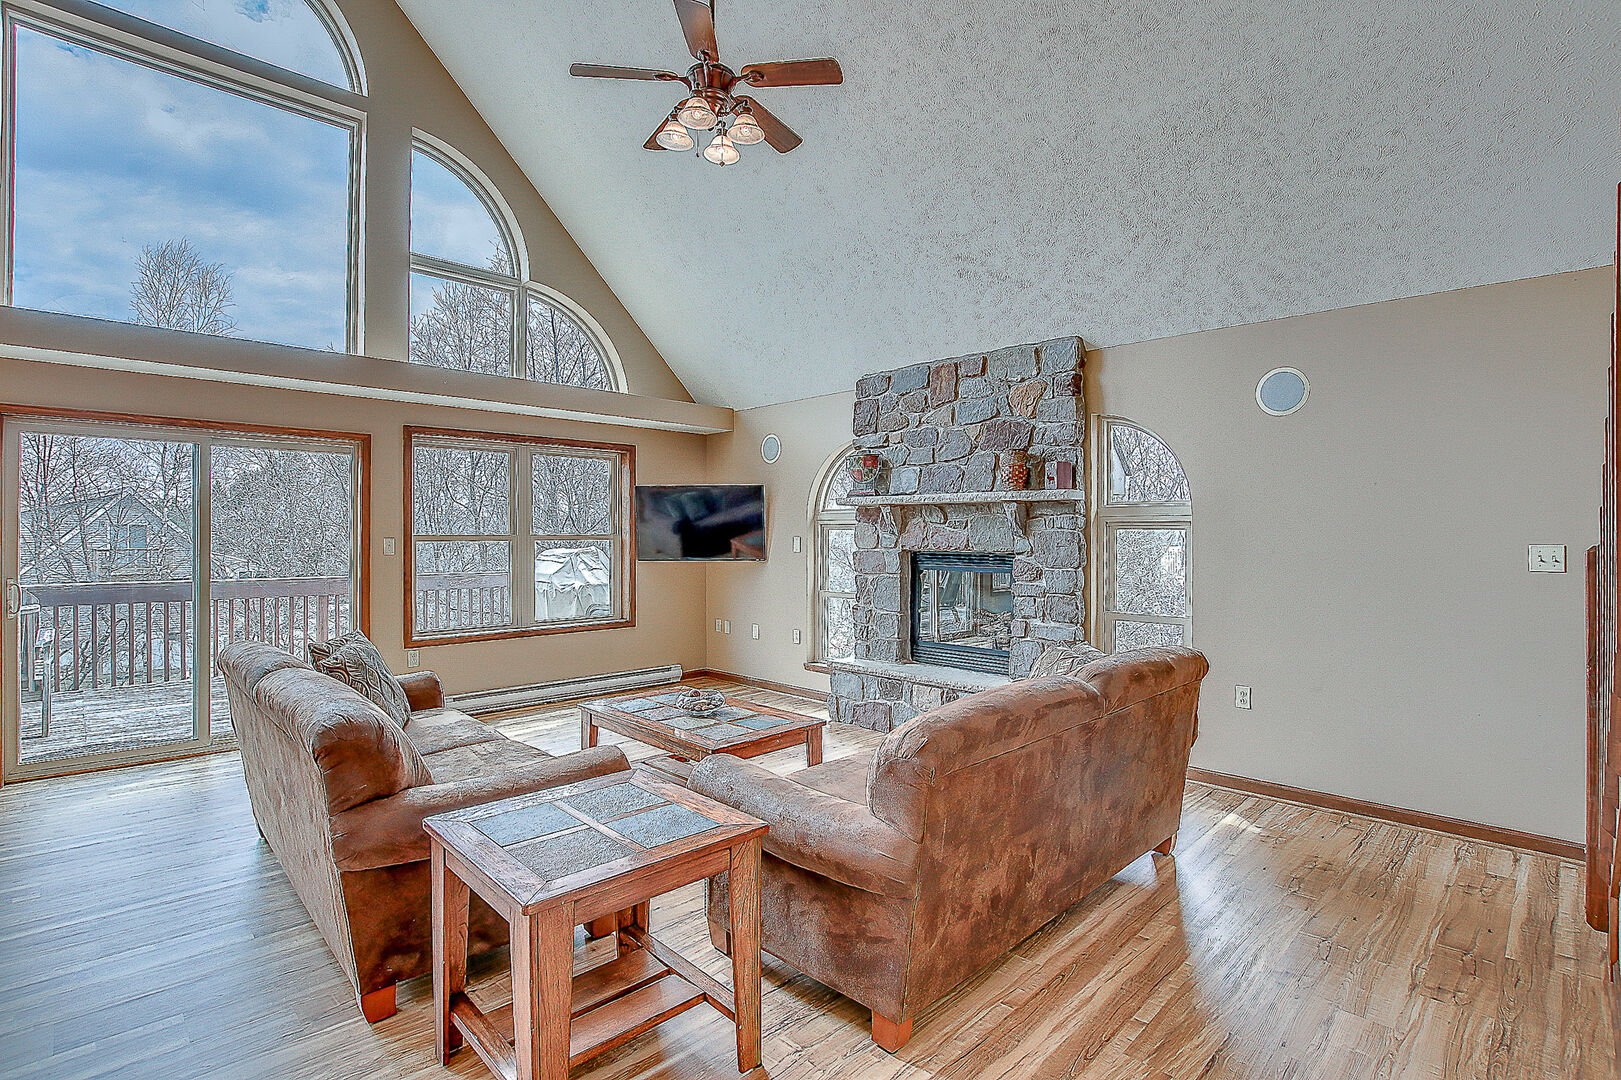 Great Room with Stone Fireplace and Comfy Seating for TV Viewing and Catching up.